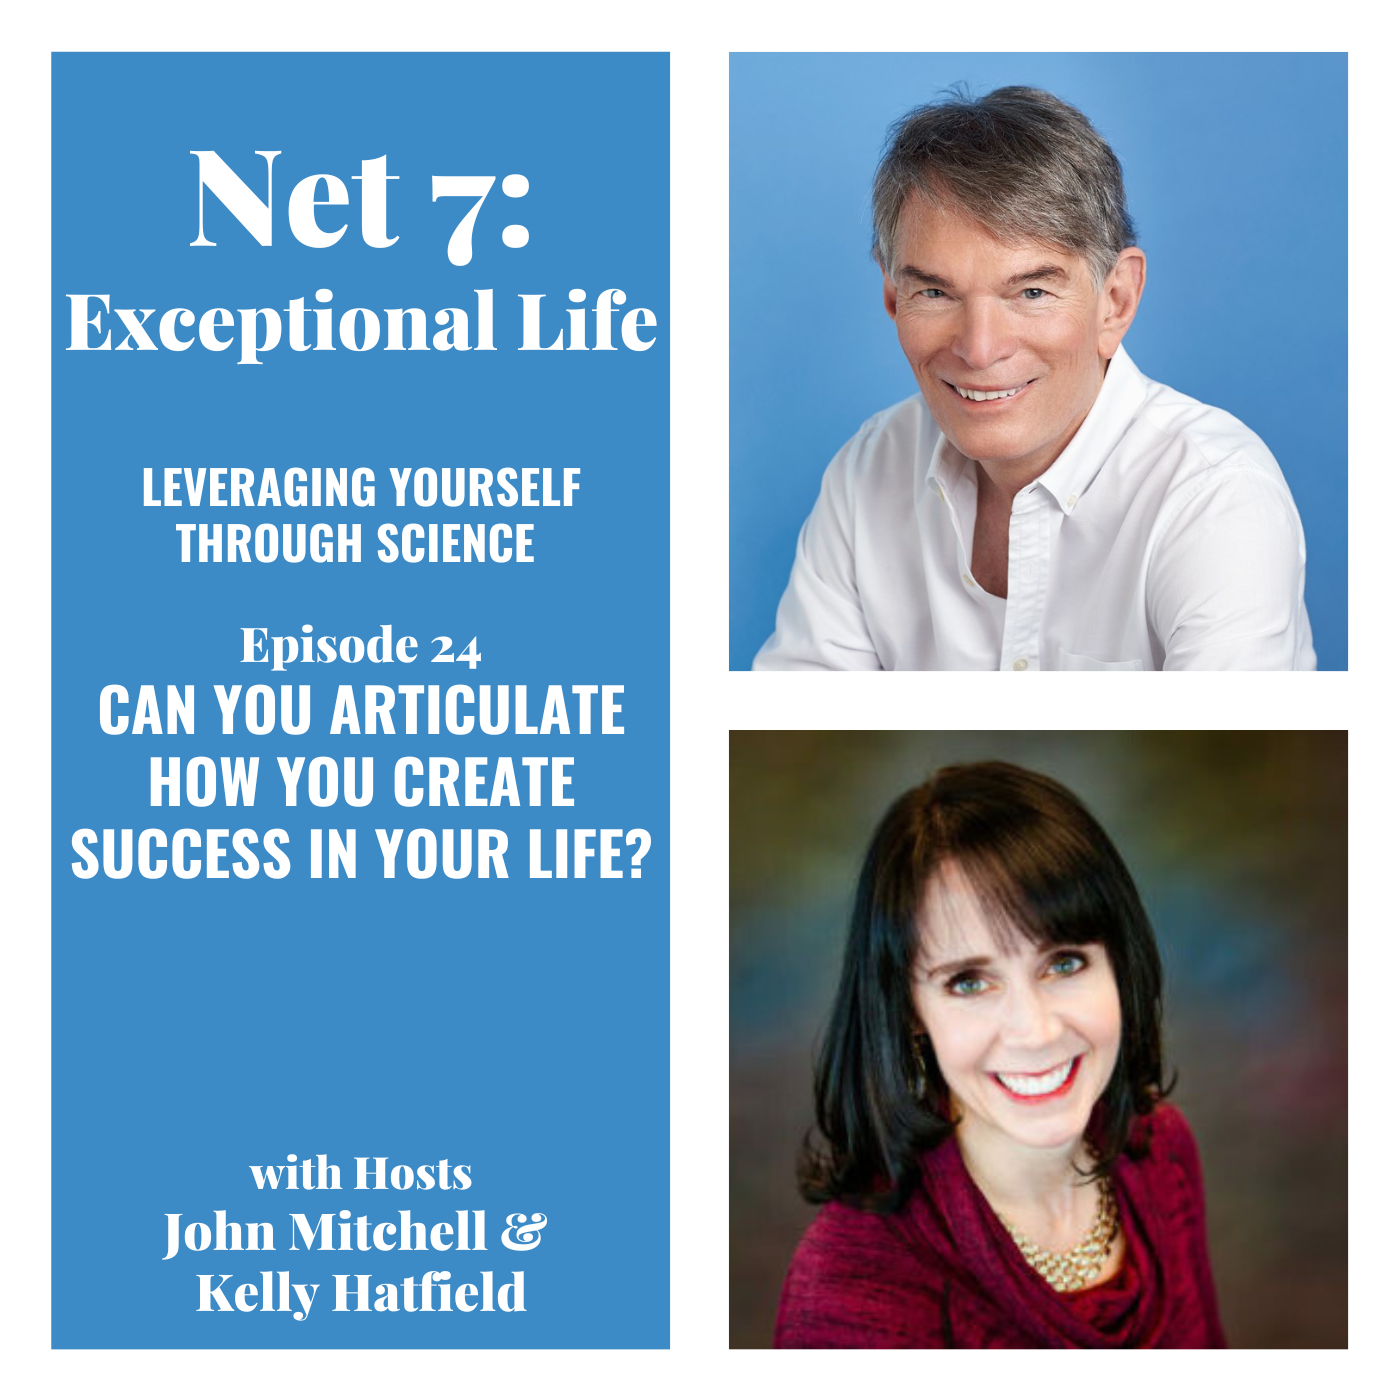 Can You Articulate How You Create Success In Your Life?